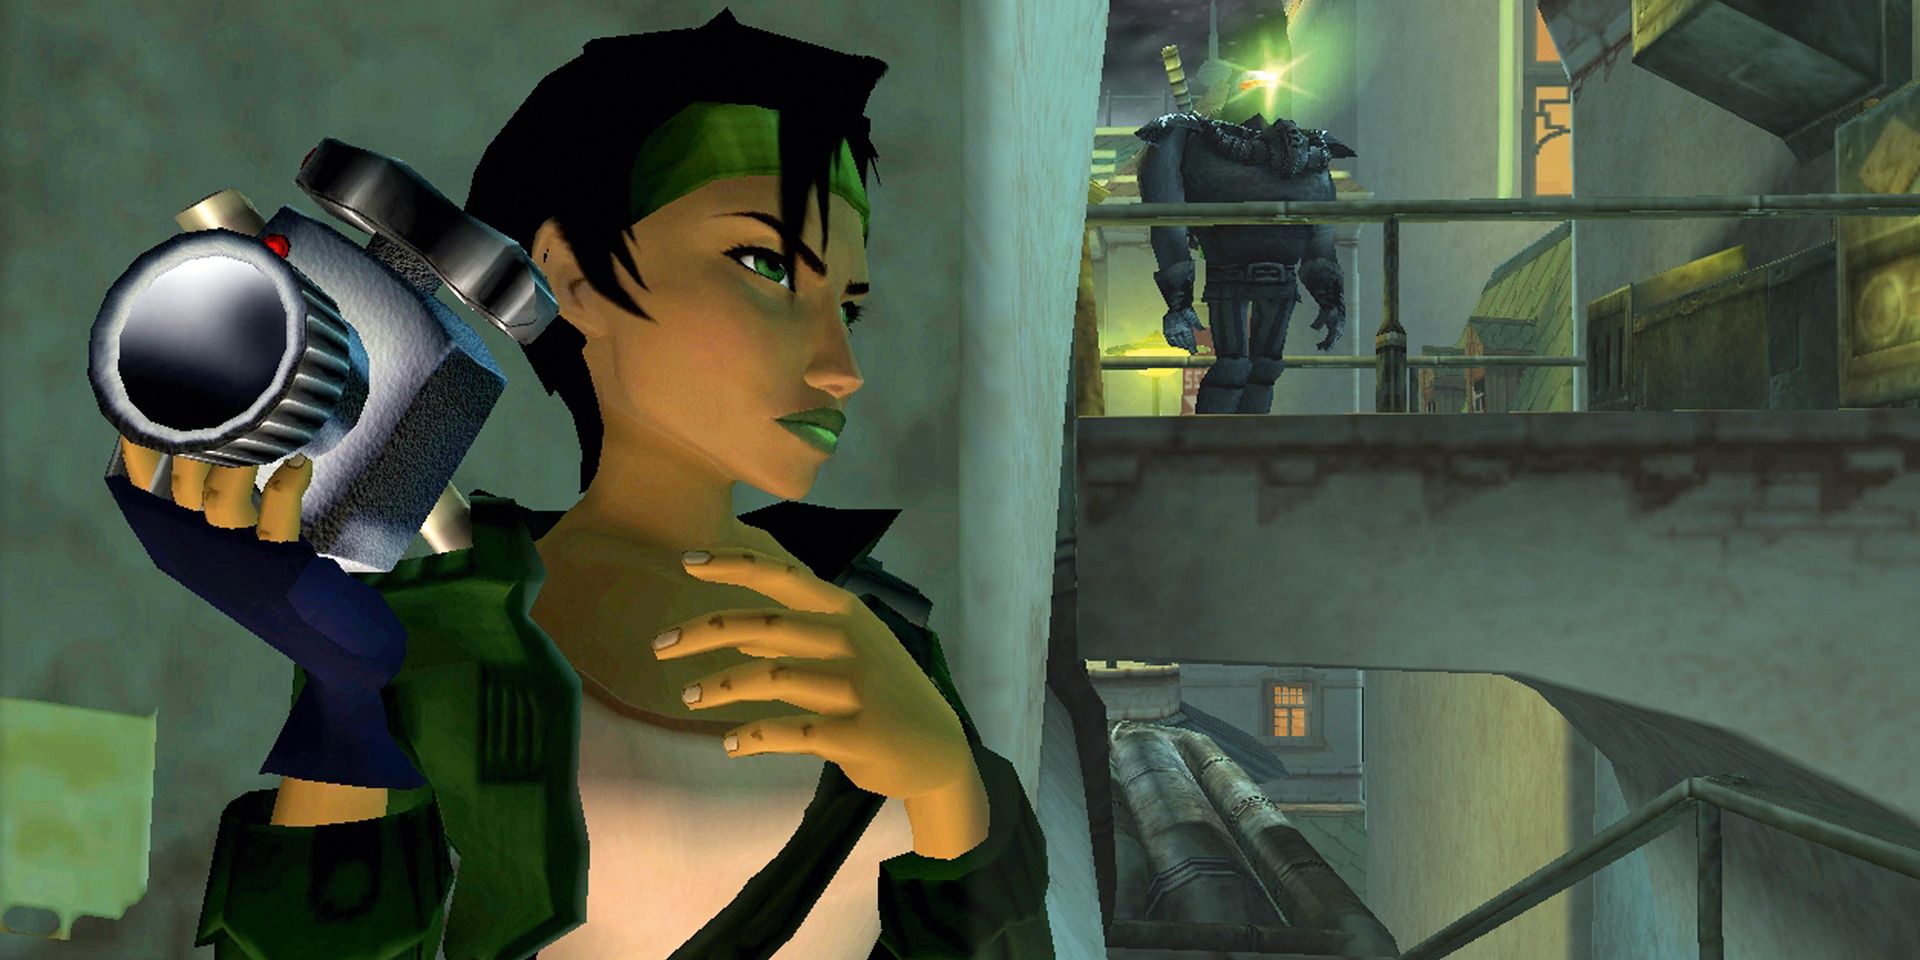 Jade holding a camera and avoiding enemies in Beyond Good and Evil HD